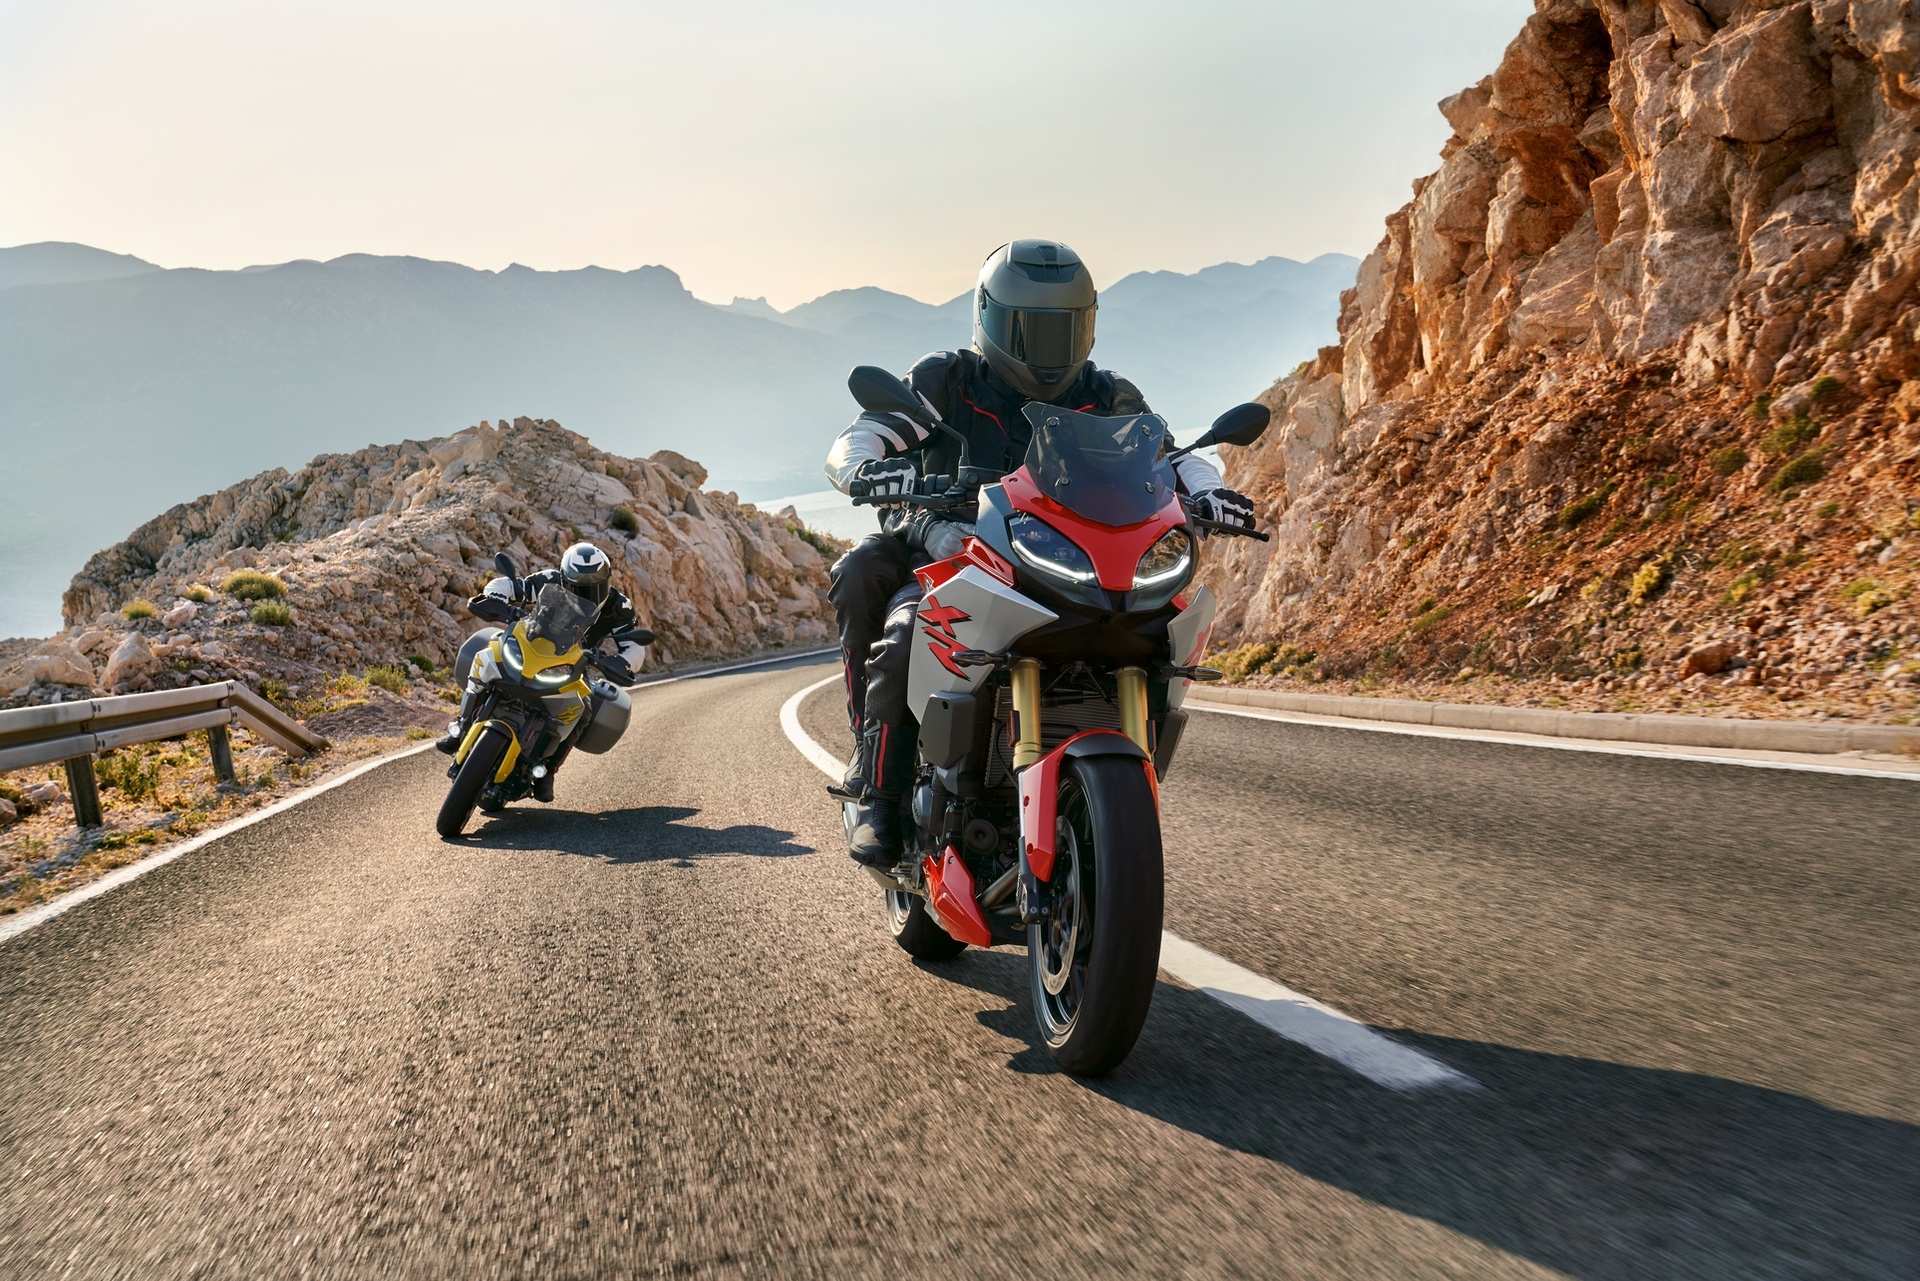 BMW F 900 XR, New models unveiled, Adventure-ready, Exciting performance, 1920x1290 HD Desktop